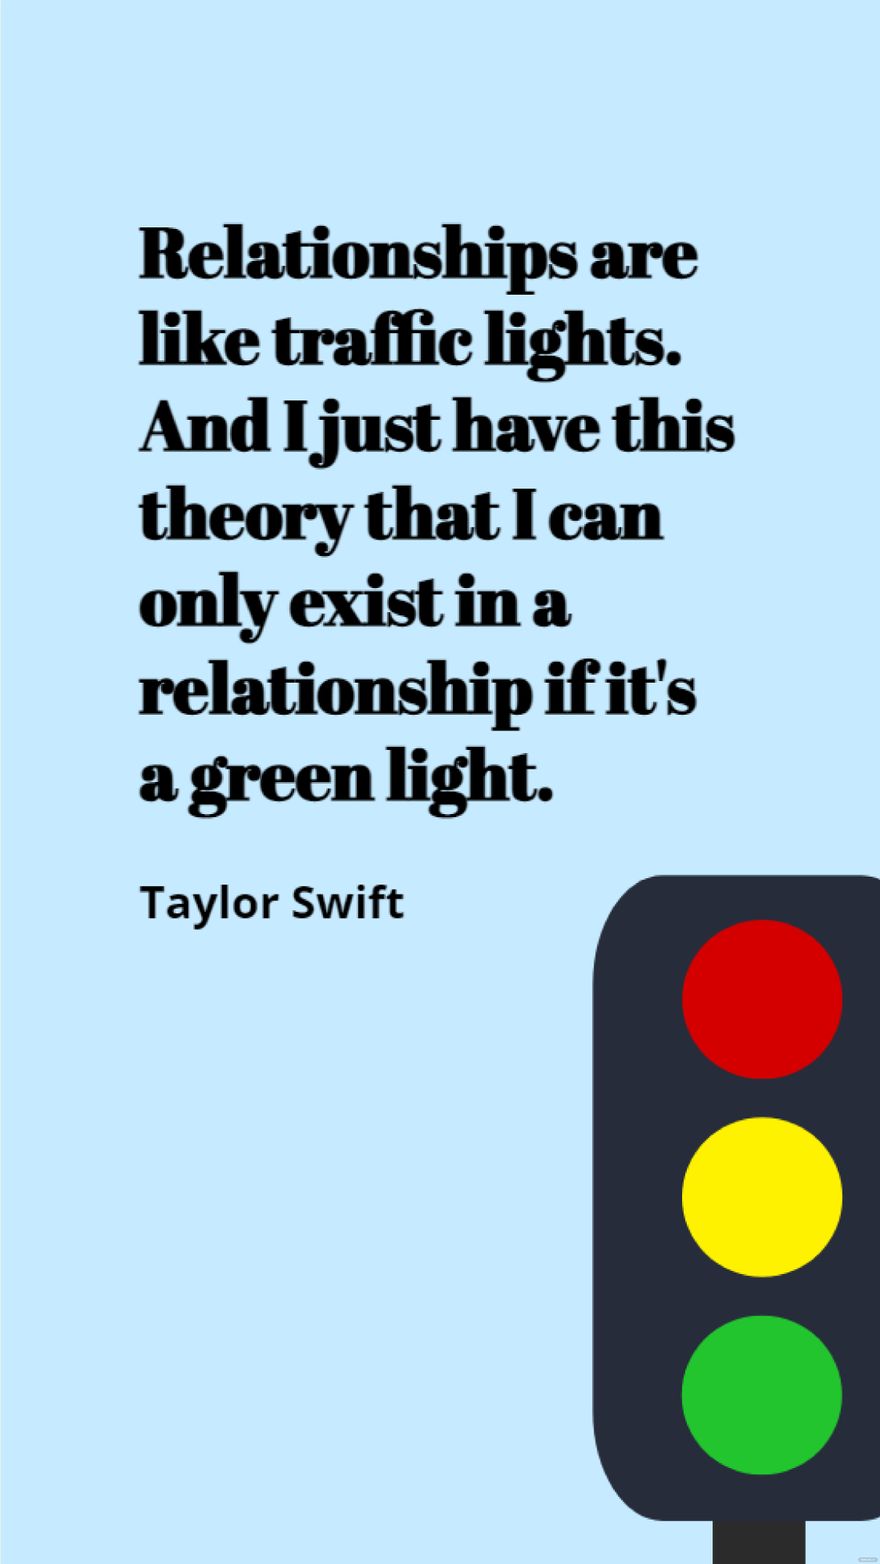 Taylor Swift - Relationships are like traffic lights. And I just have this theory that I can only exist in a relationship if it's a green light.